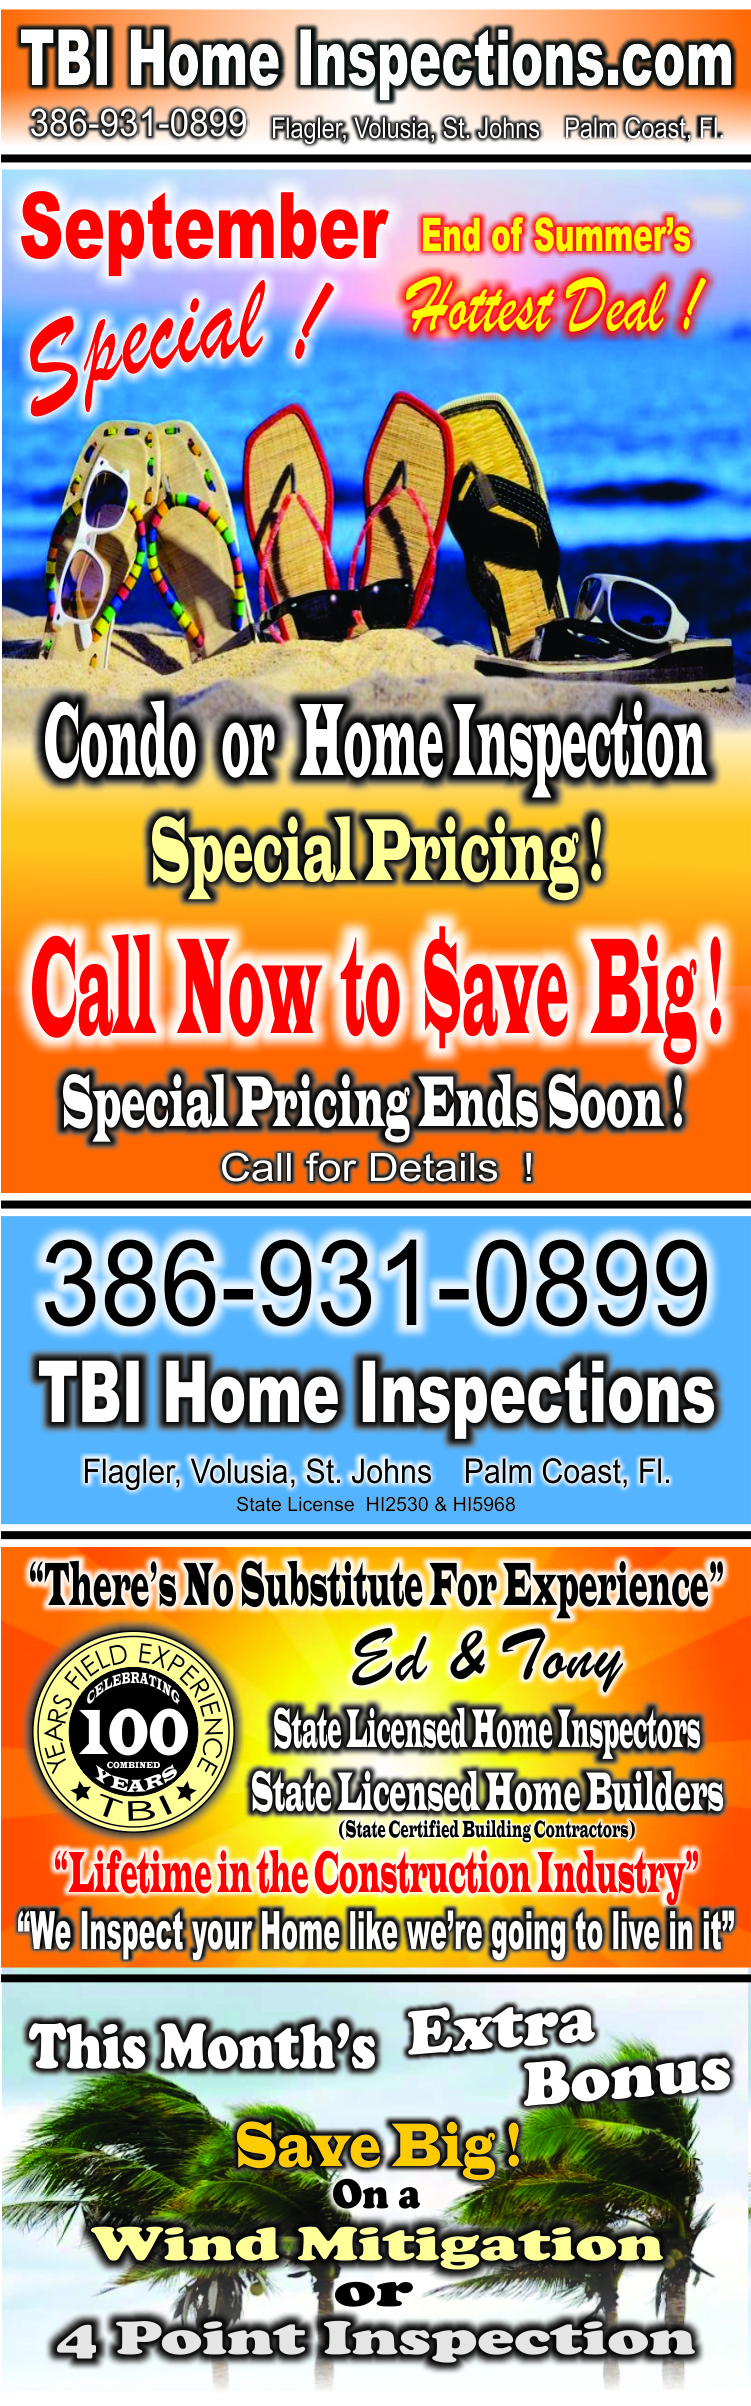 TBI Home Inspections